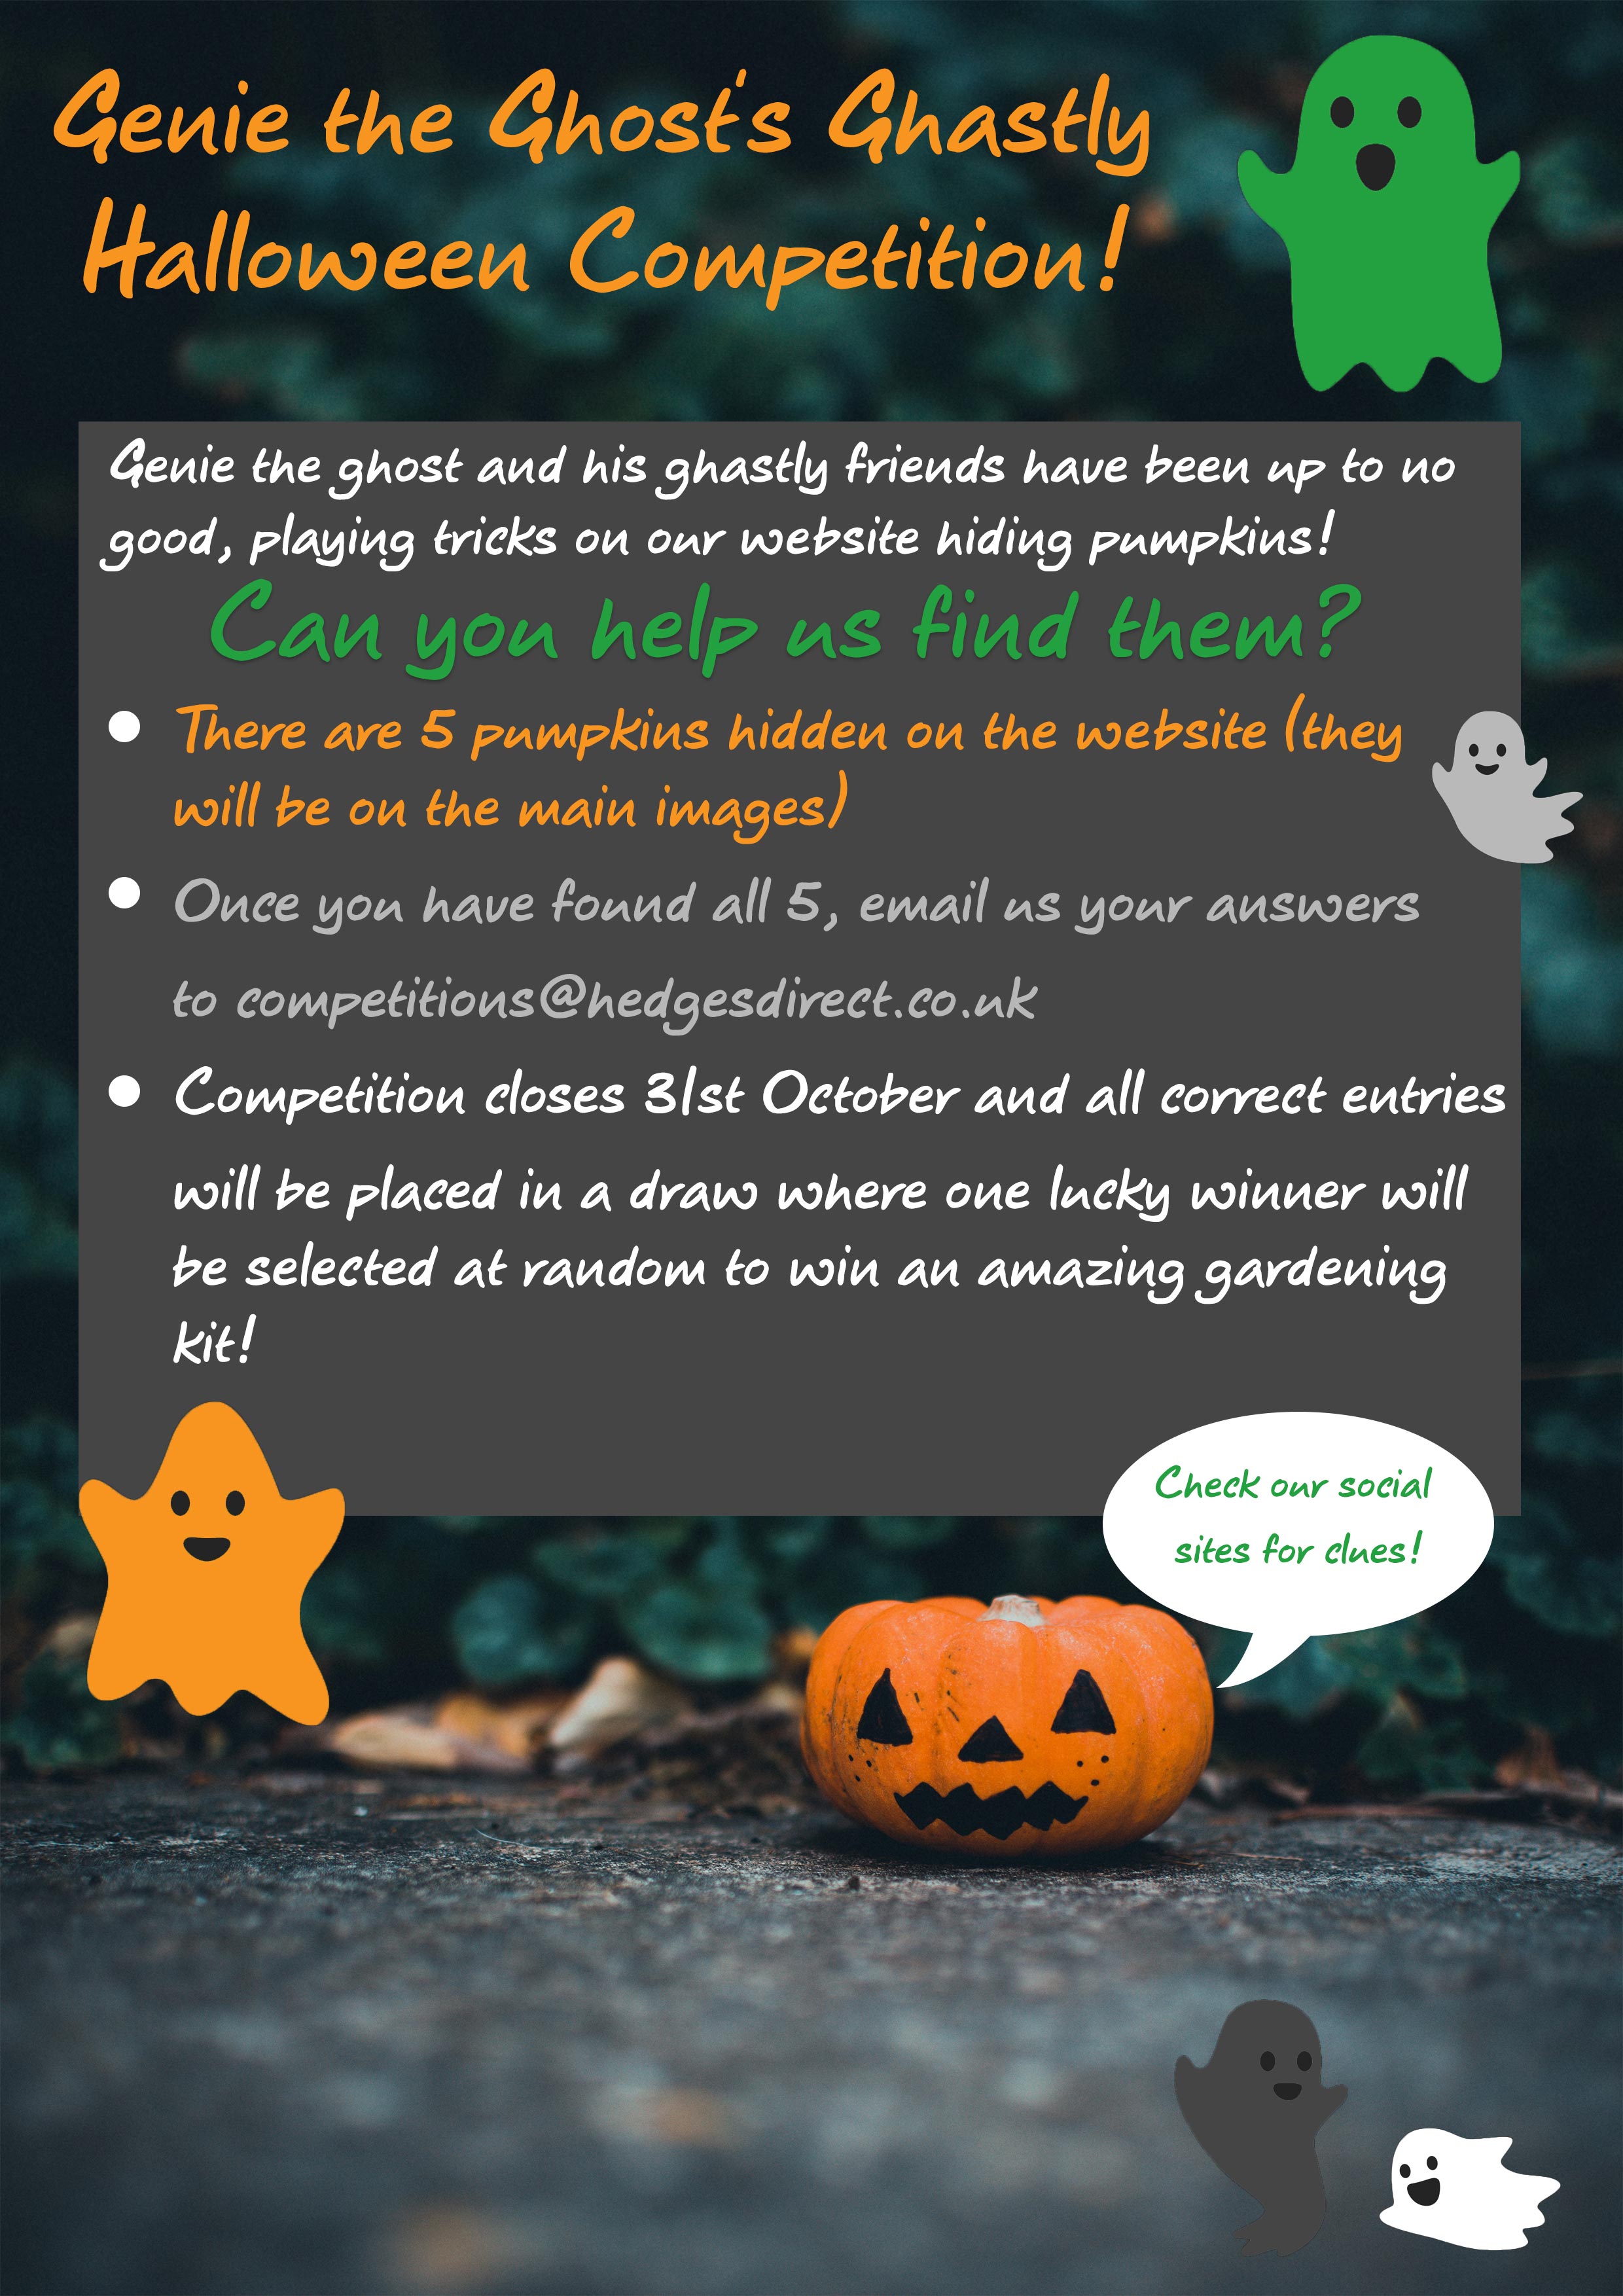 Genie's Ghastly Halloween Competition | Hedges Direct Blog